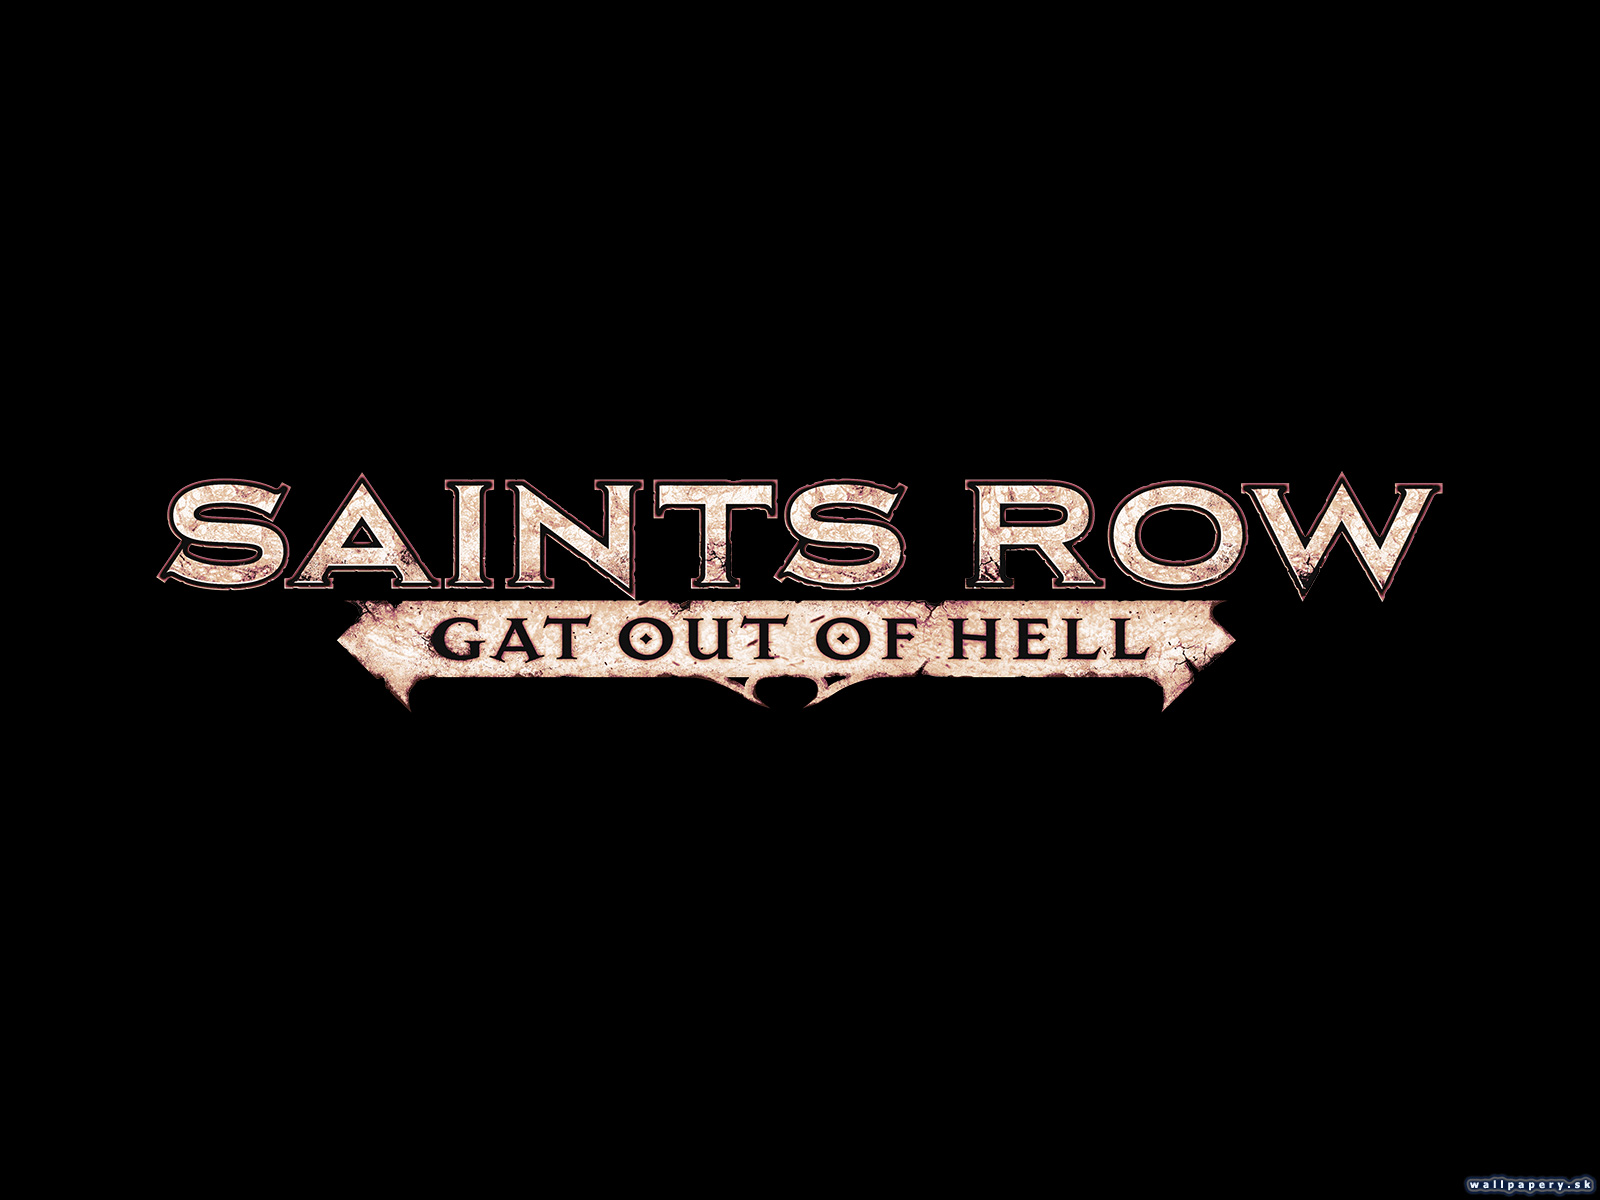 Saints Row: Gat Out of Hell - wallpaper 3